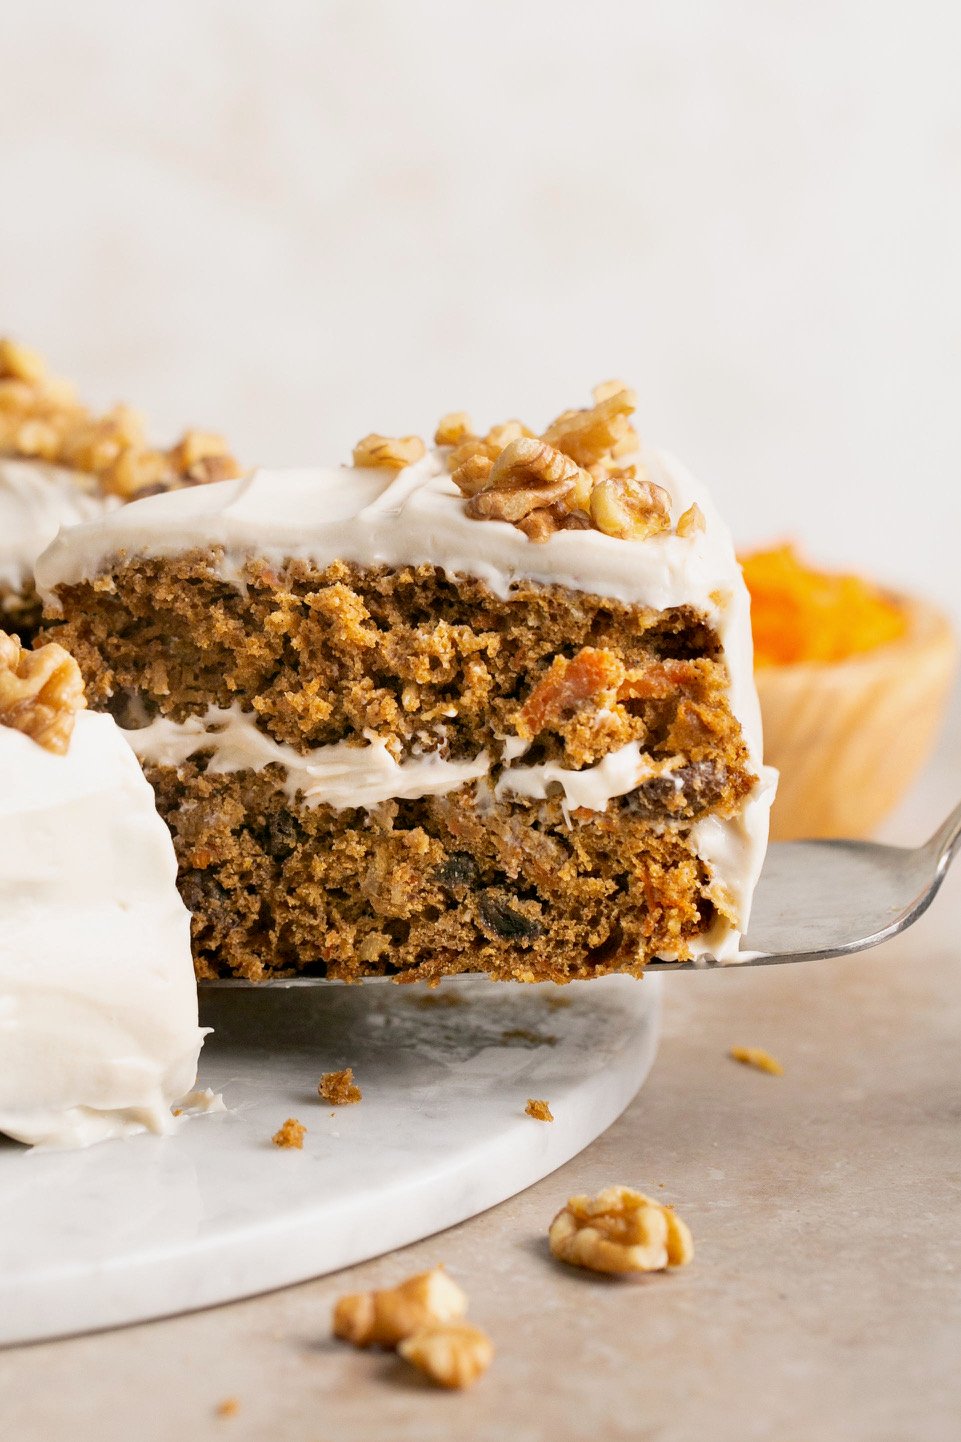 a slice of gluten free carrot cake being pulled out of the whole cake with a spatula